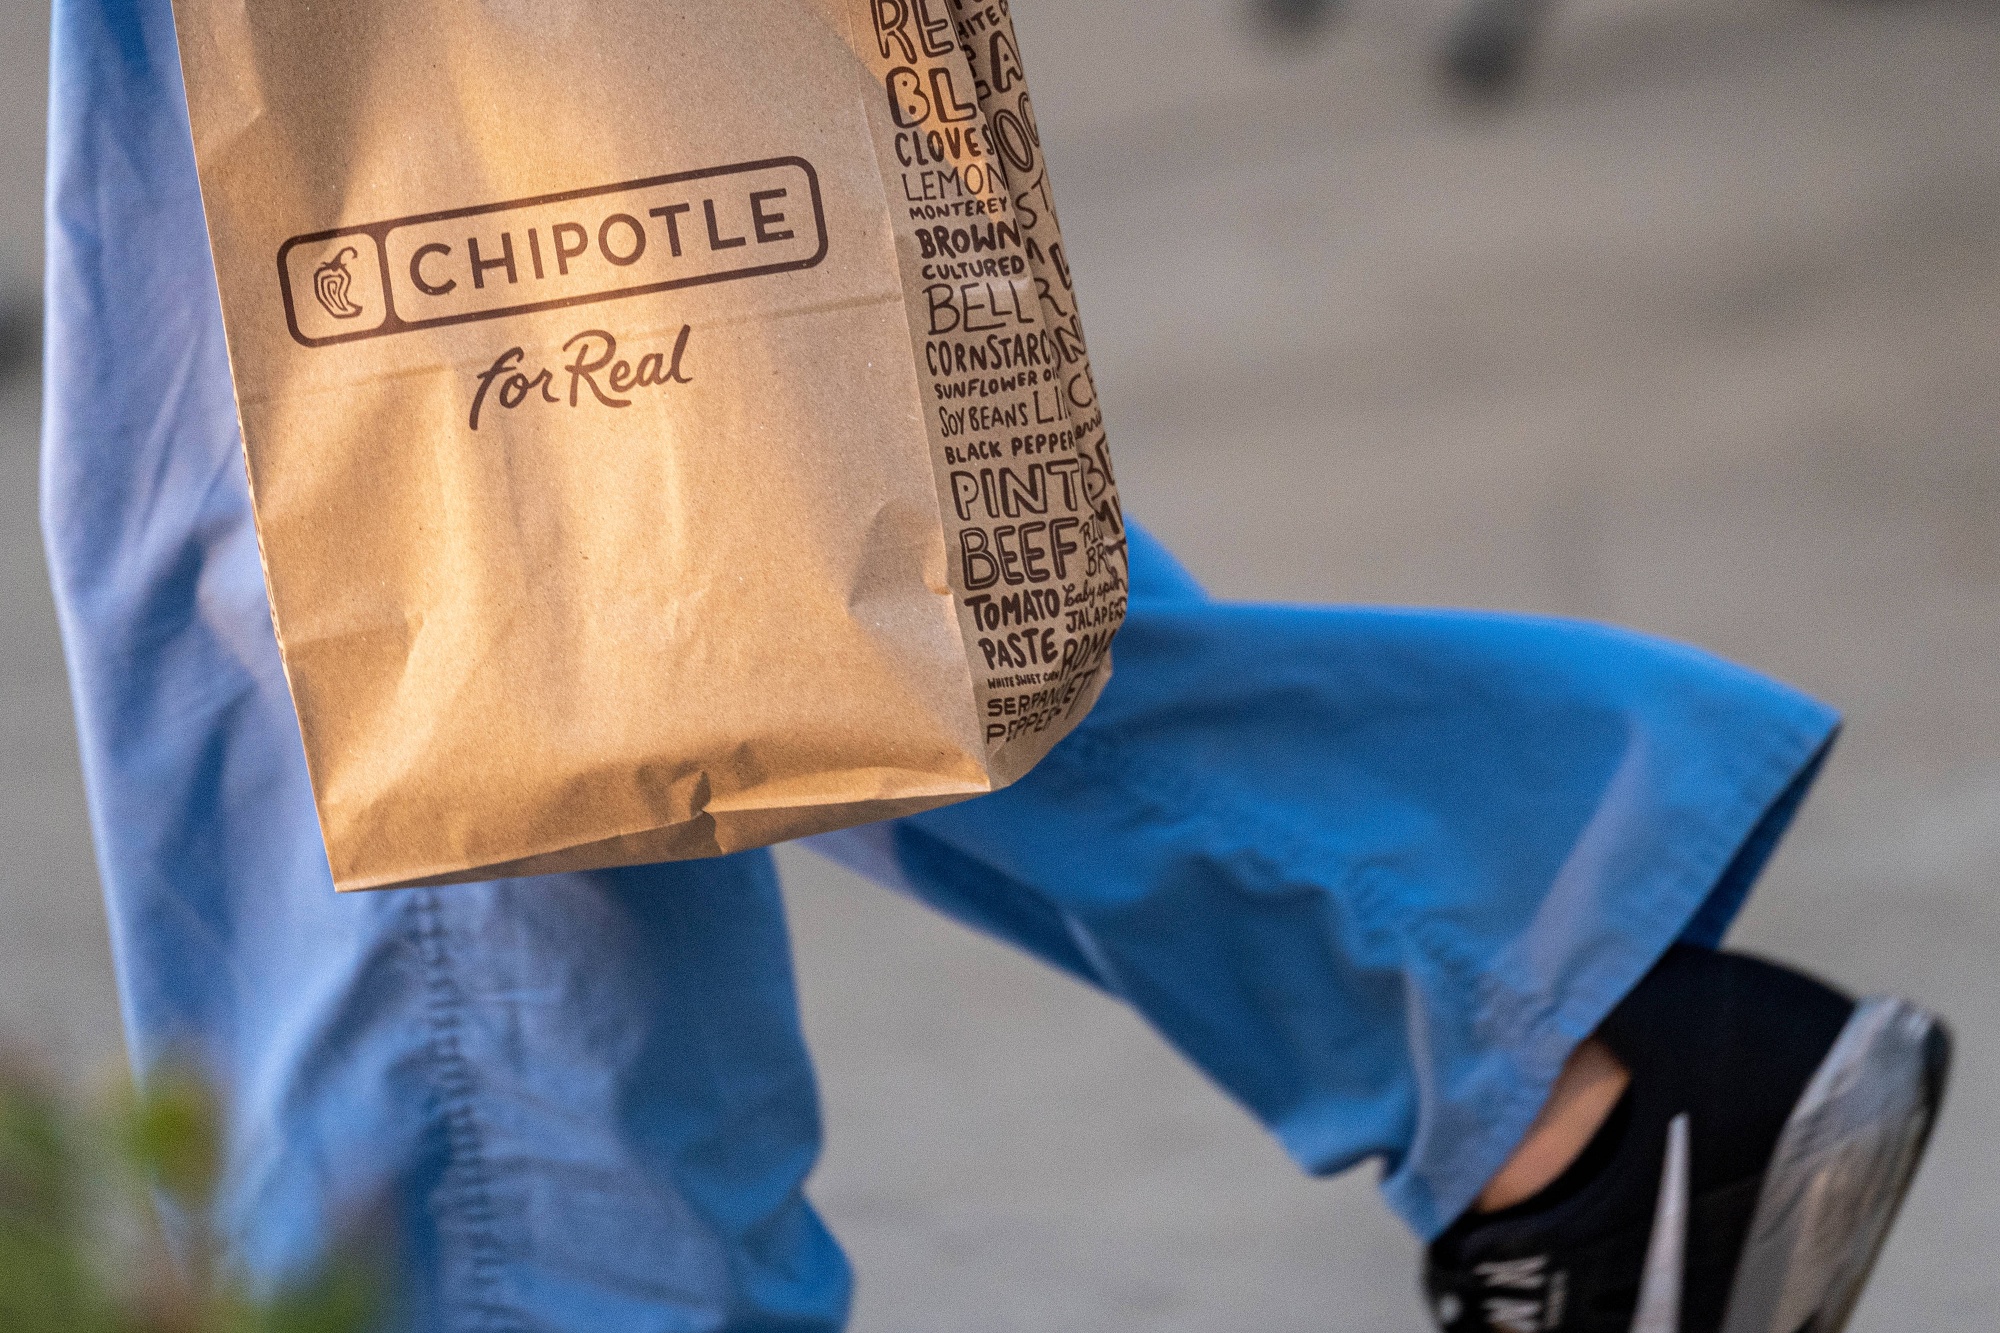 Chipotle to hire 10,000 to staff drive-thru expansion